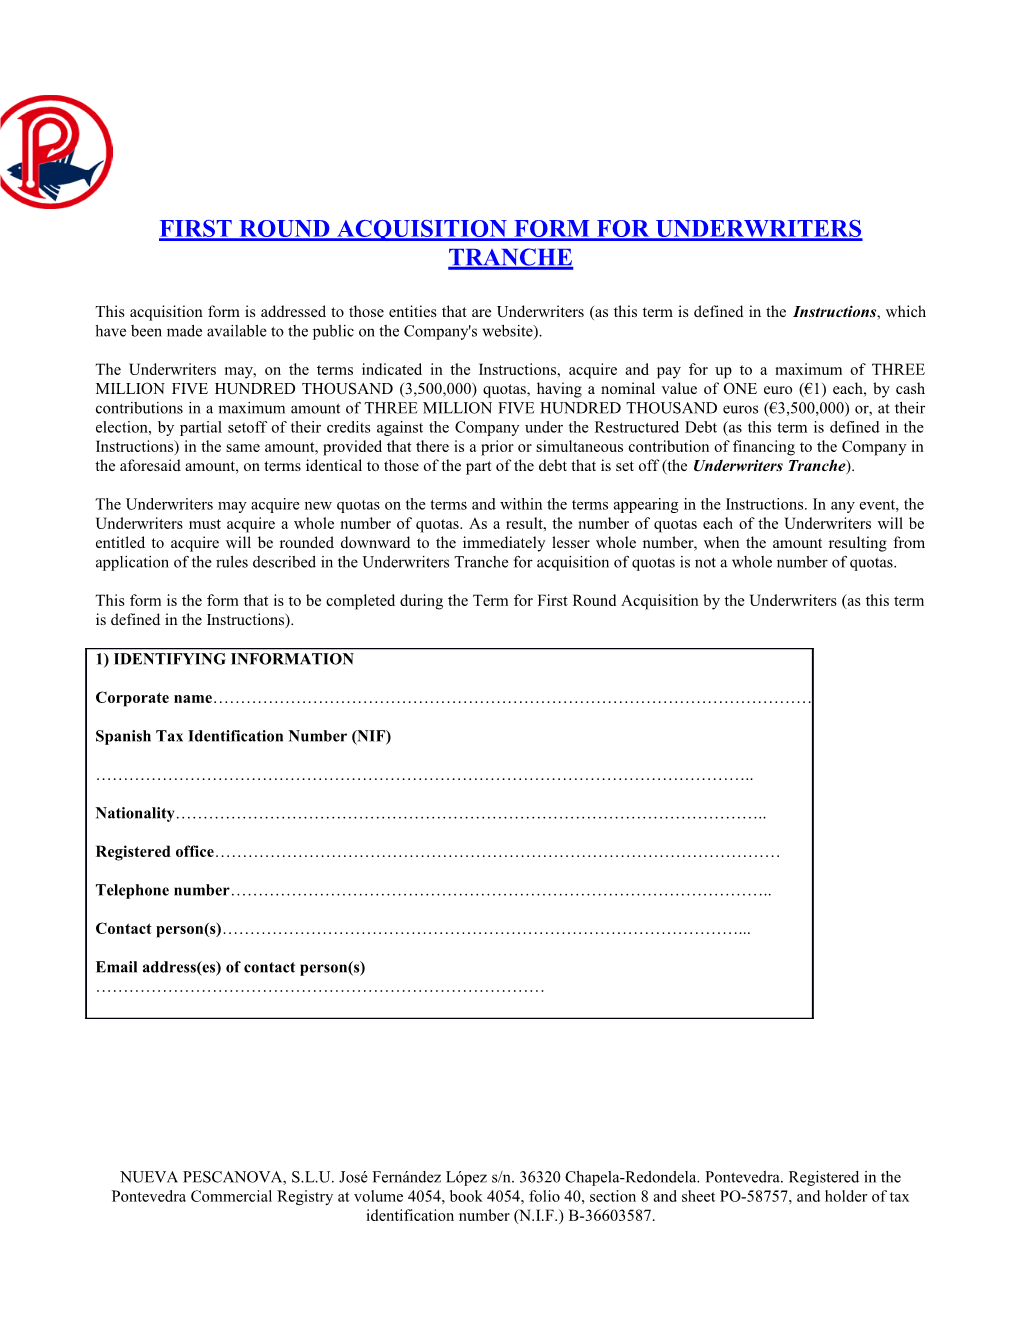 First Round Acquisition Form for Underwriters Tranche